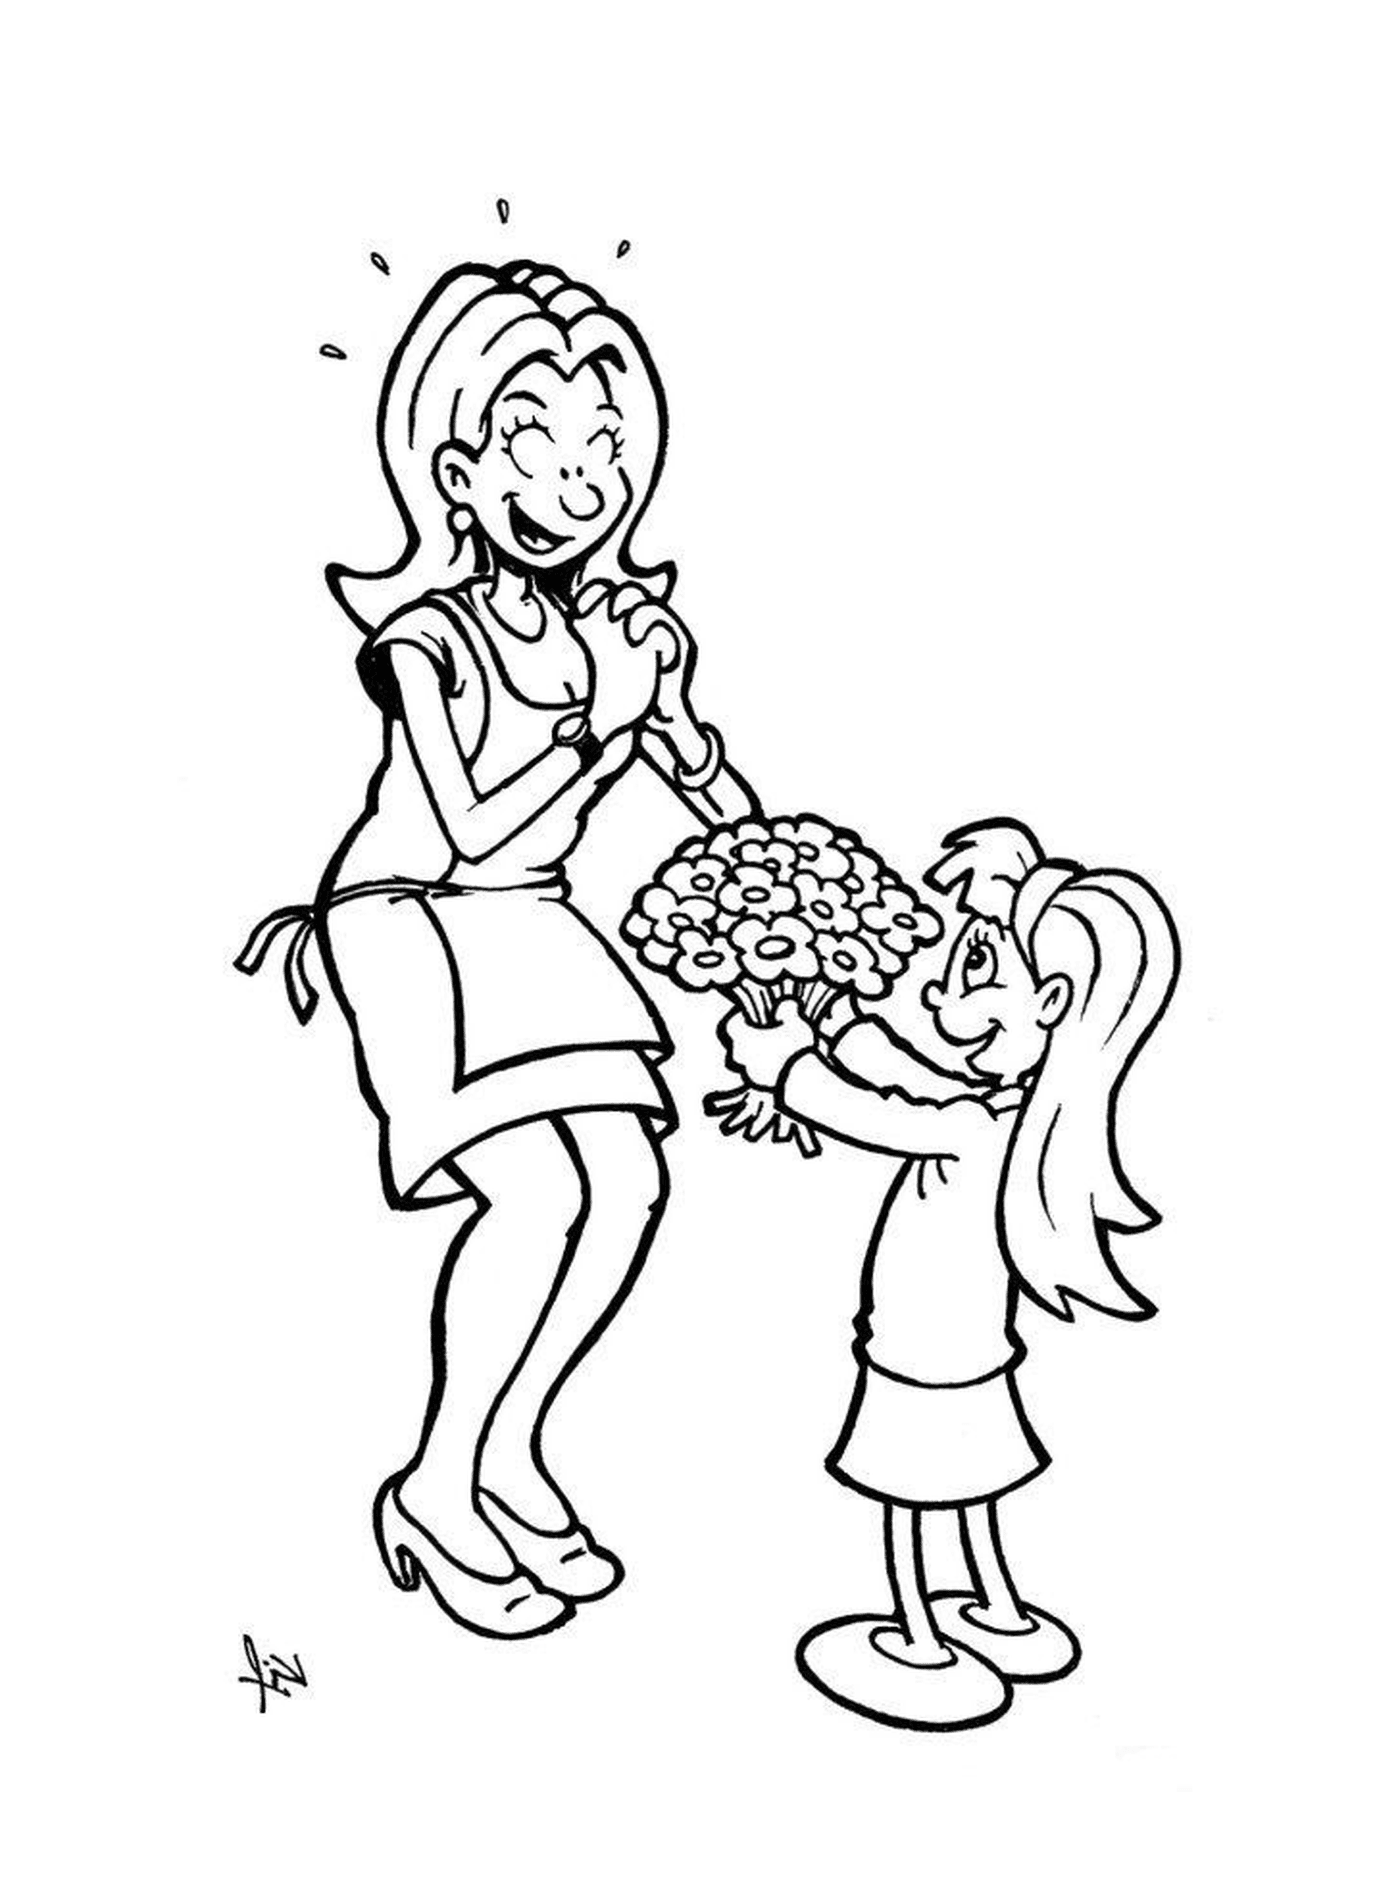  An adult and a girl holding flowers 